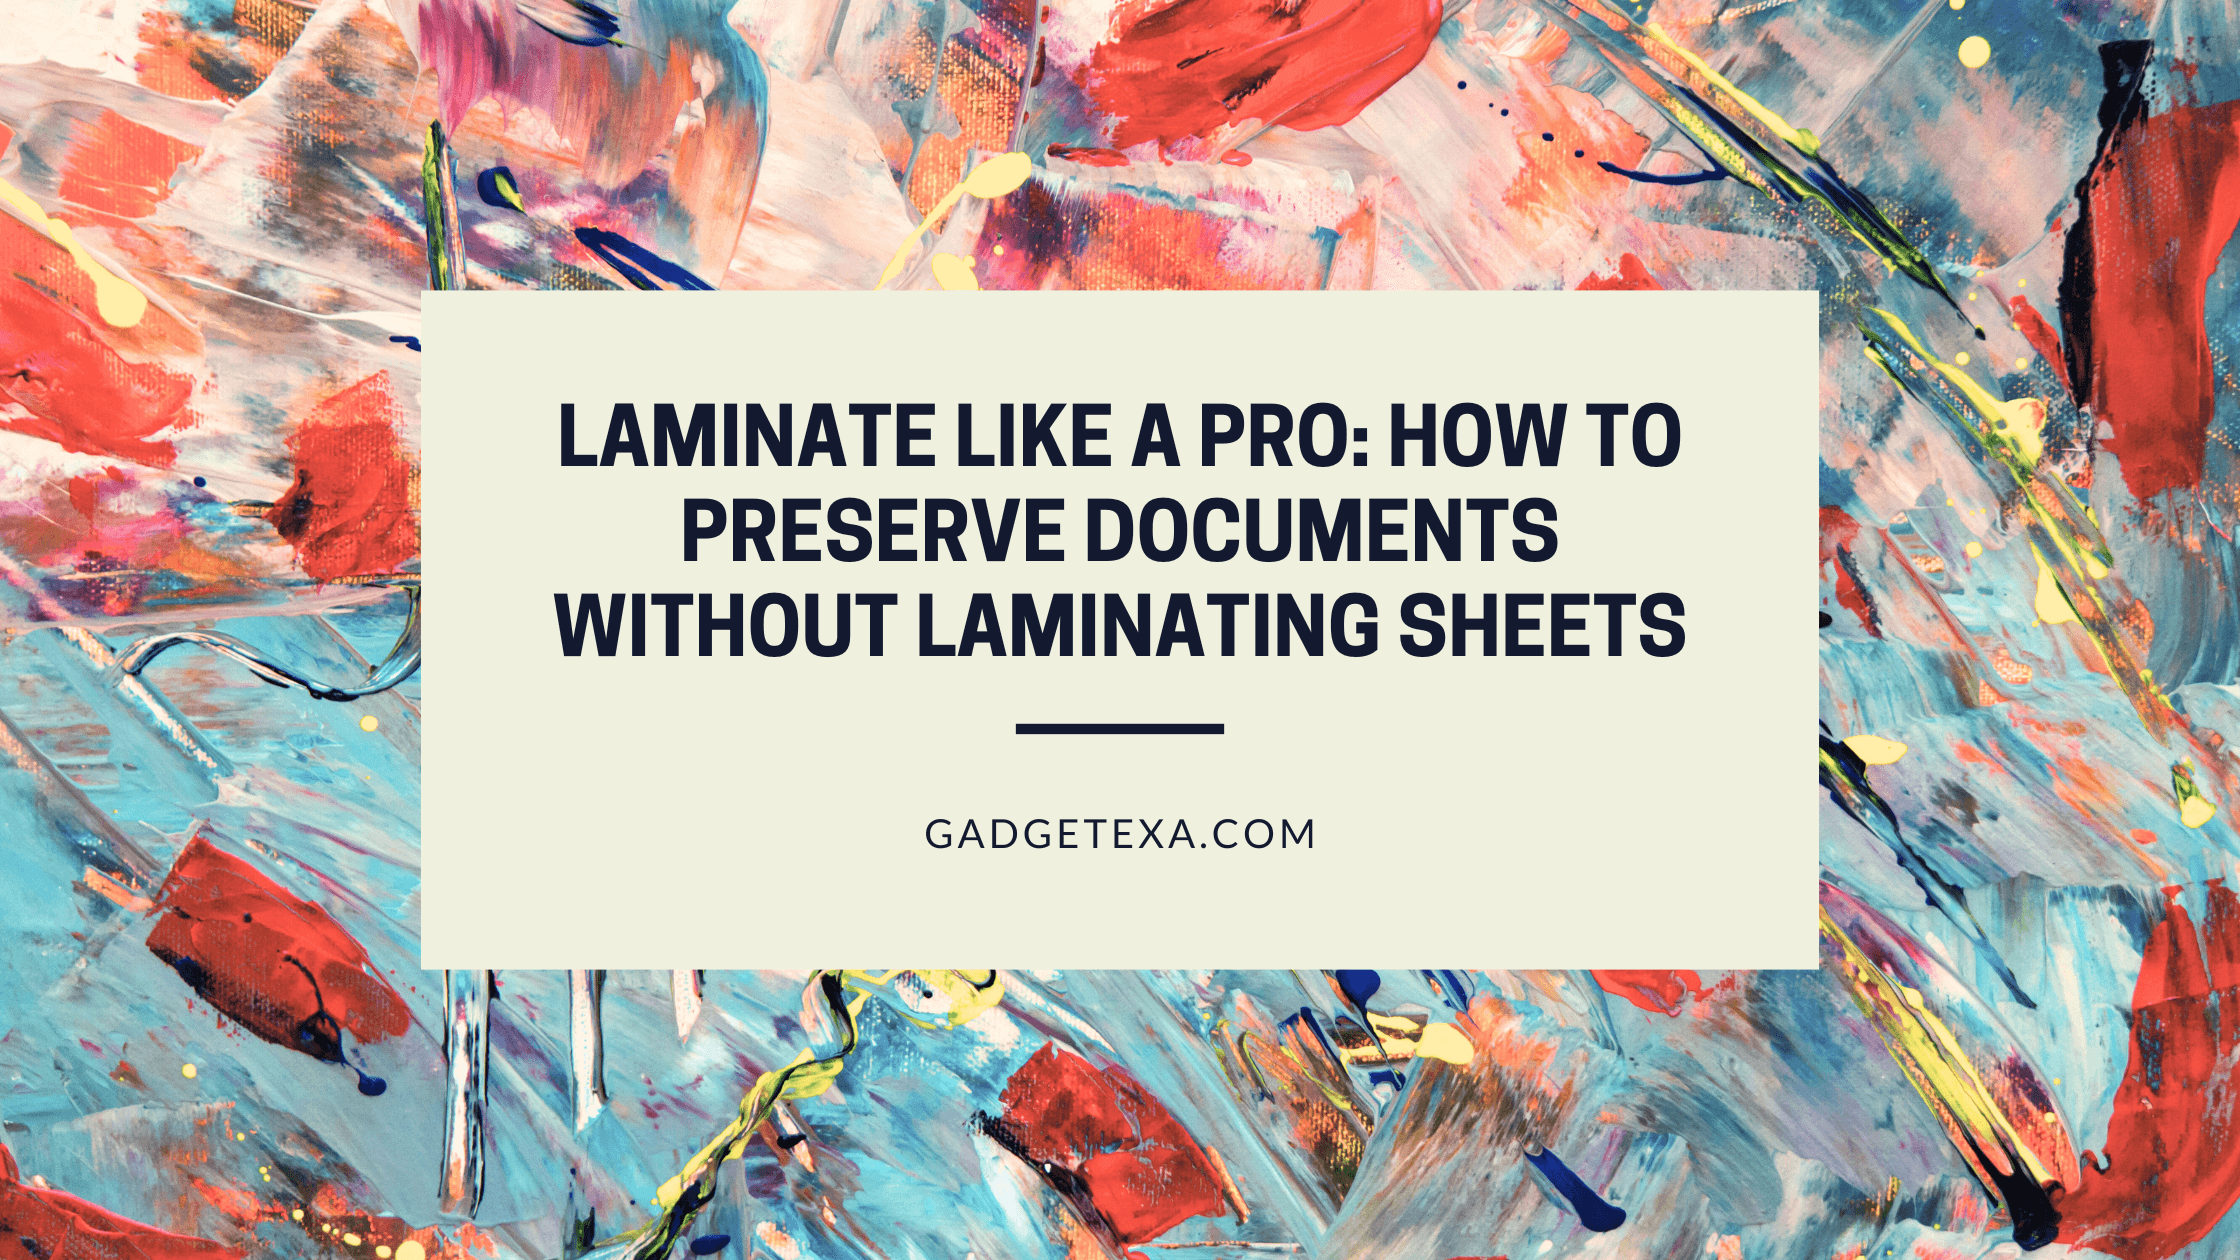 Laminate Like a Pro_ How to Preserve Documents Without Laminating Sheets